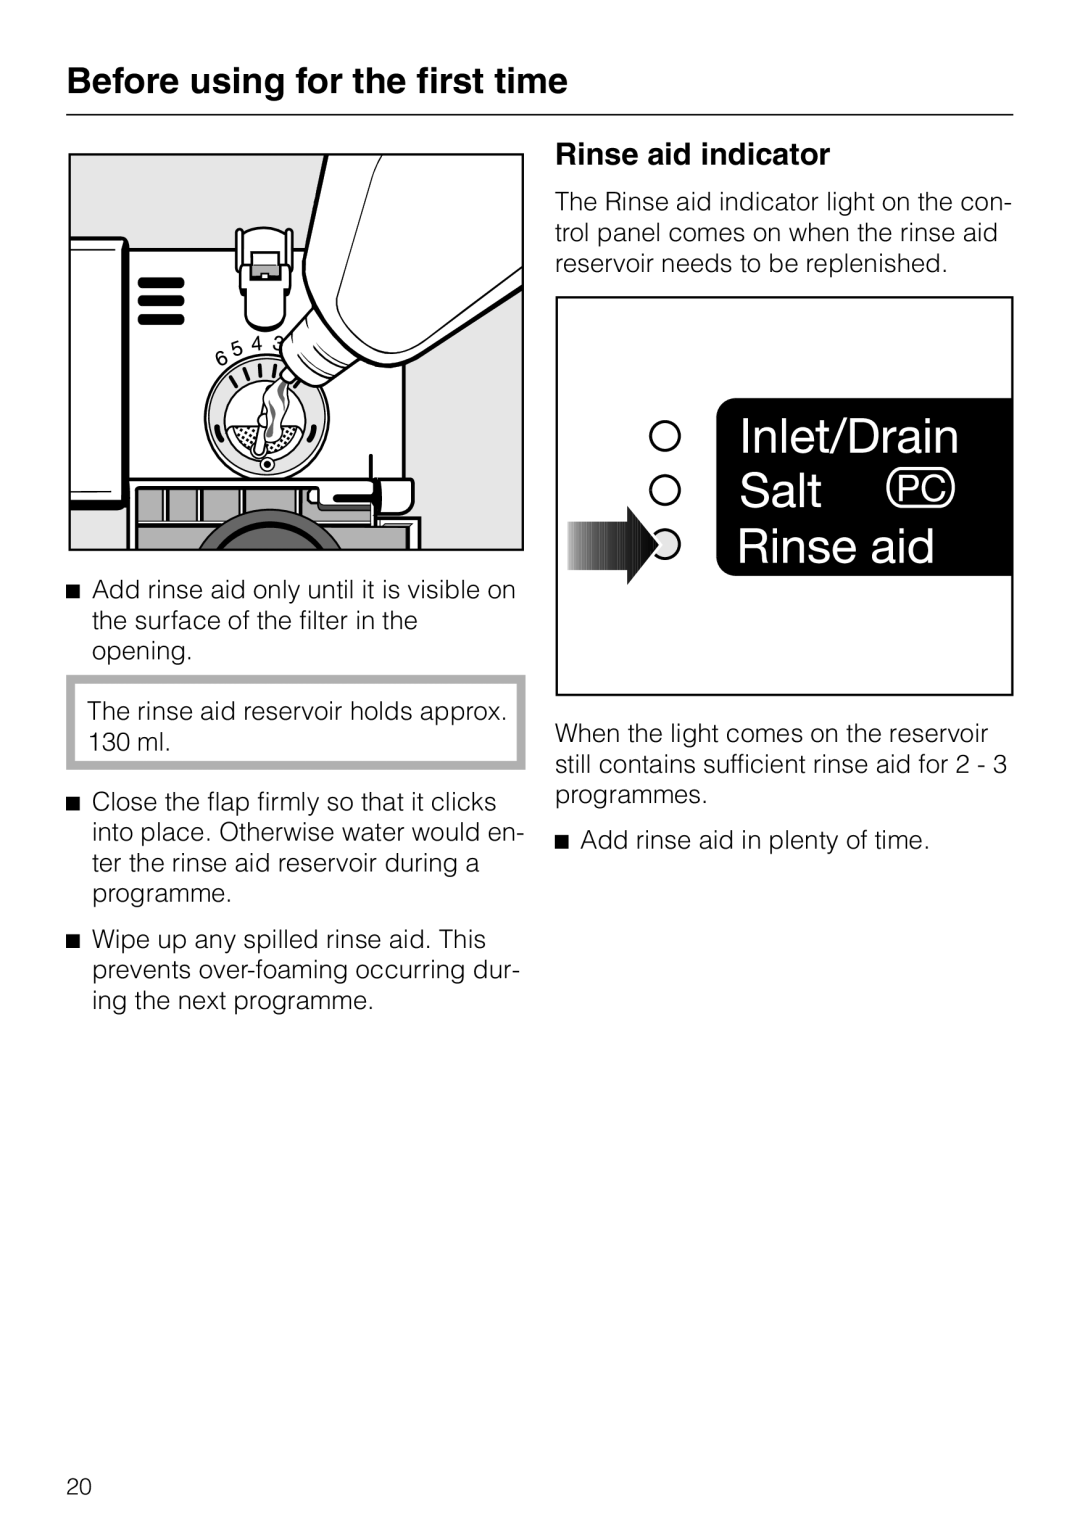 Miele dishwashers installation instructions Rinse aid indicator, Before using for the first time 